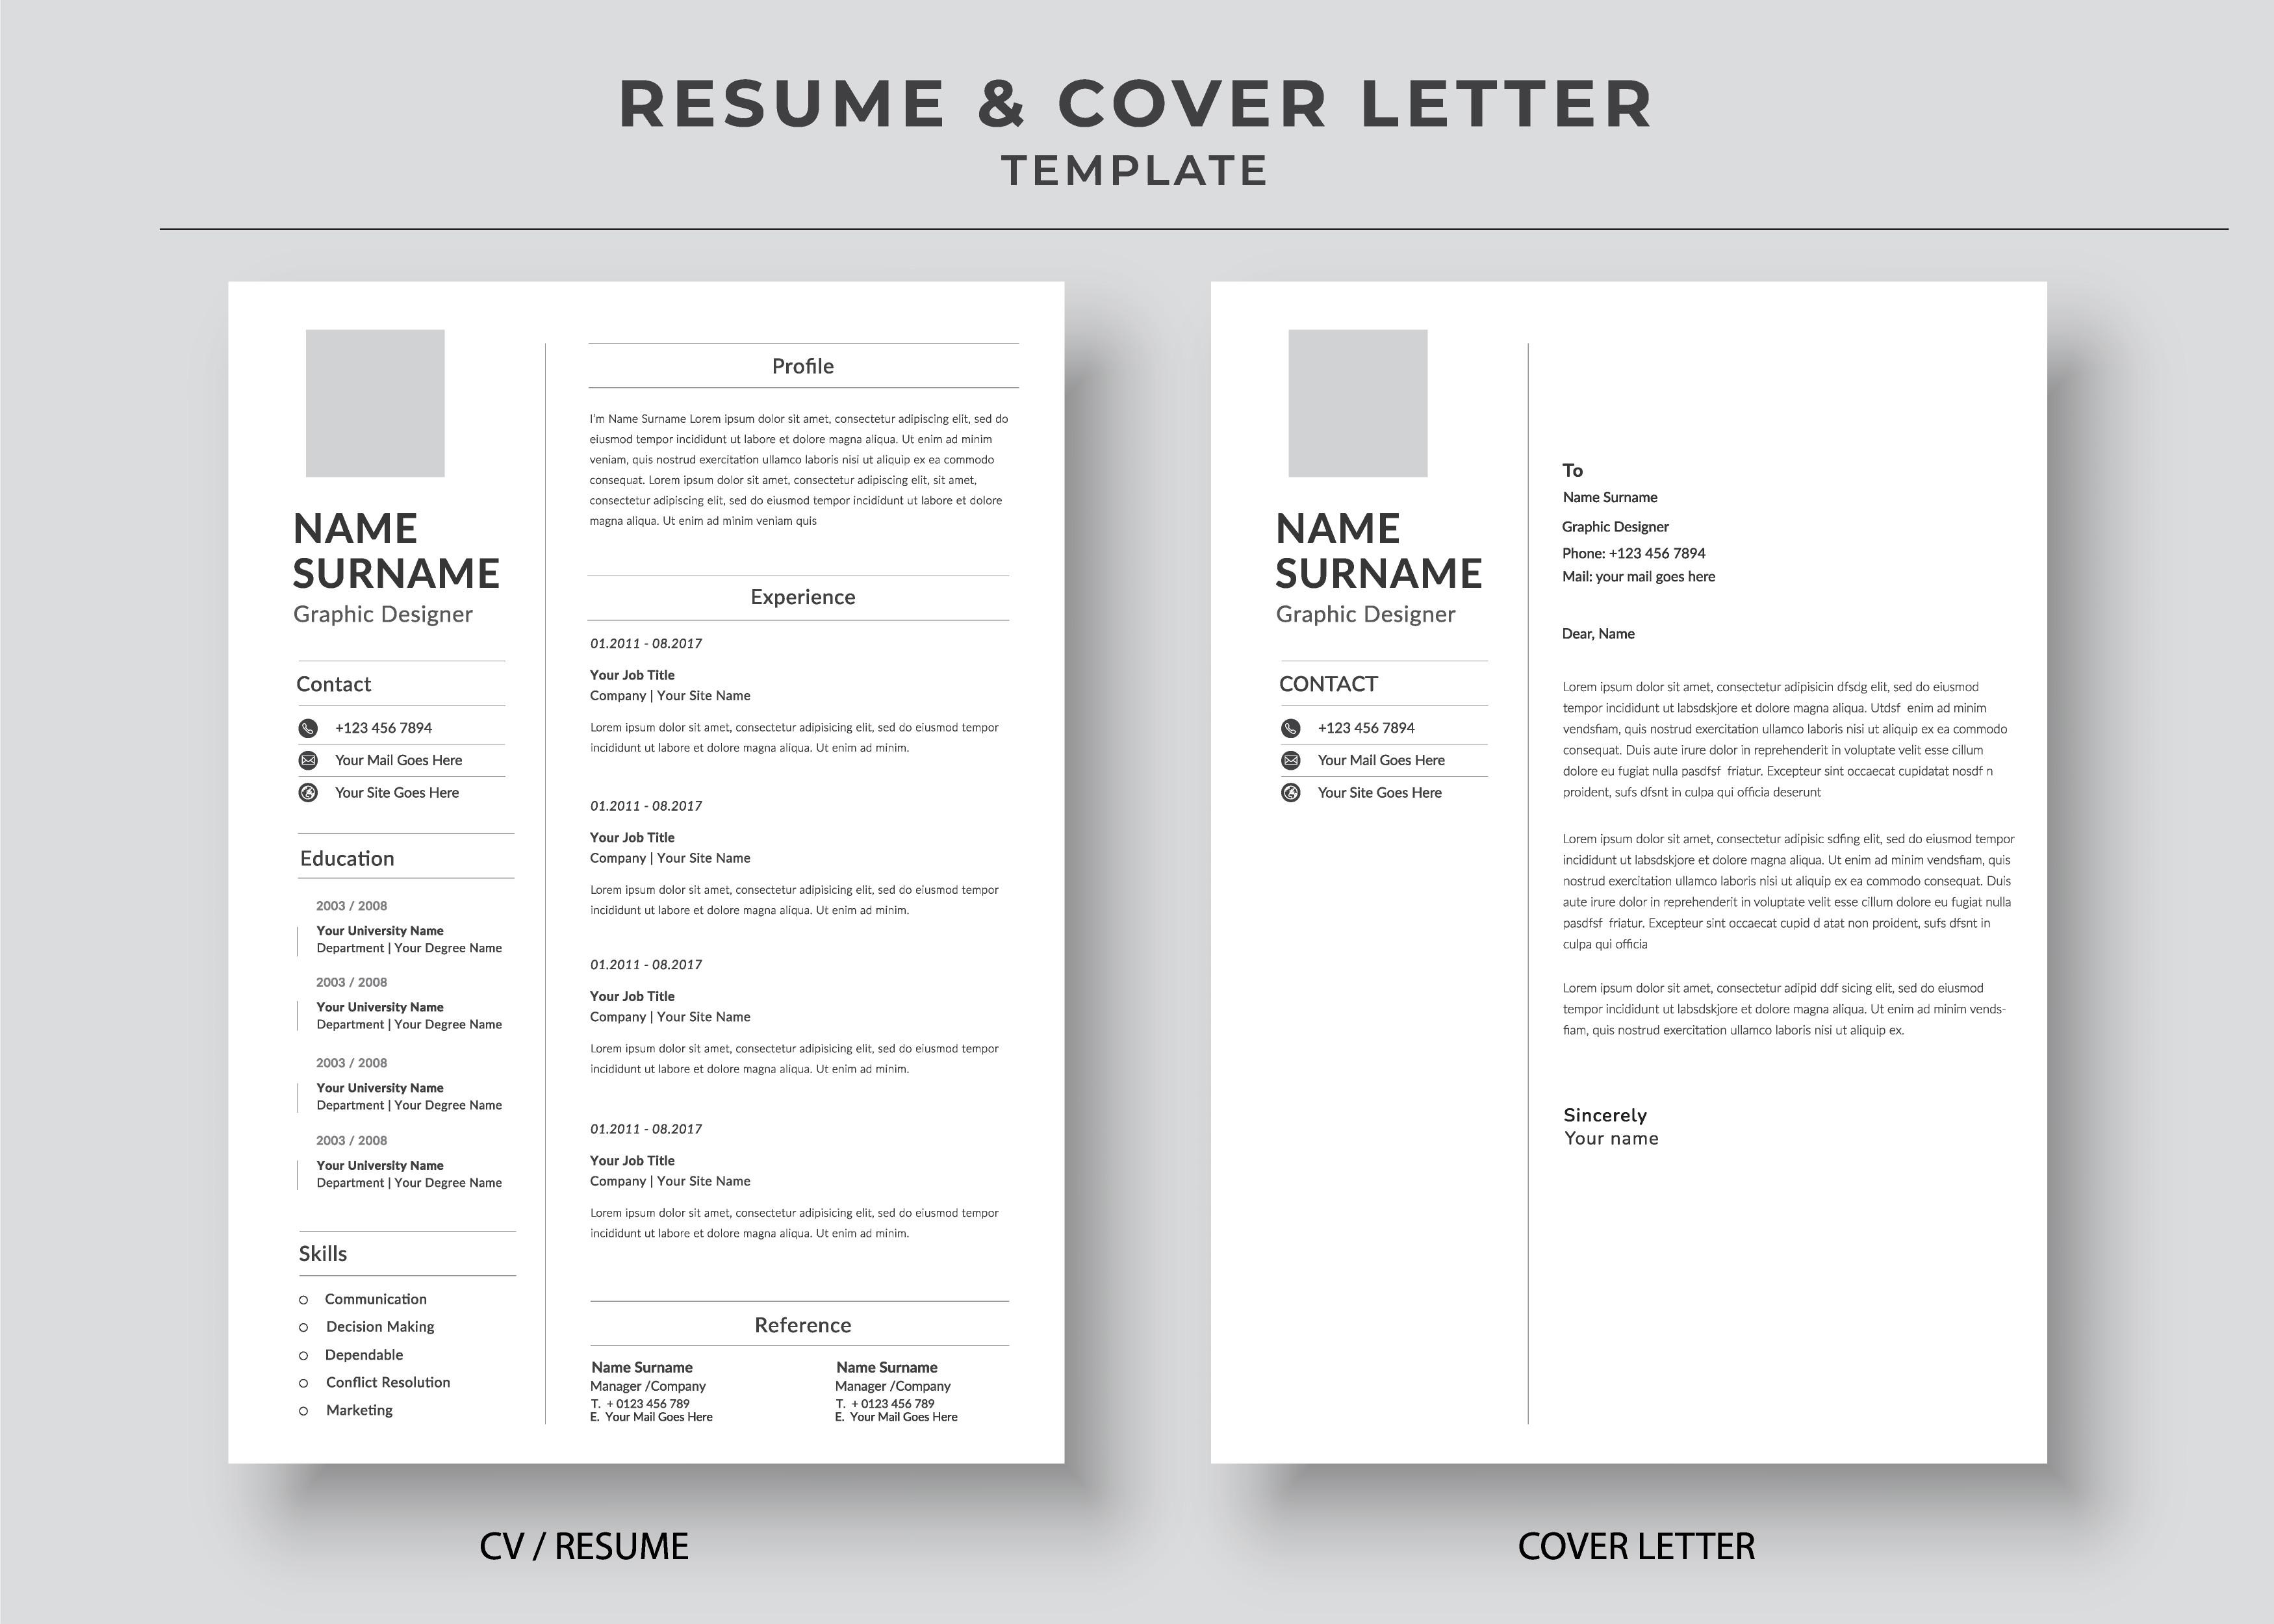 Resume and Cover Letter Template